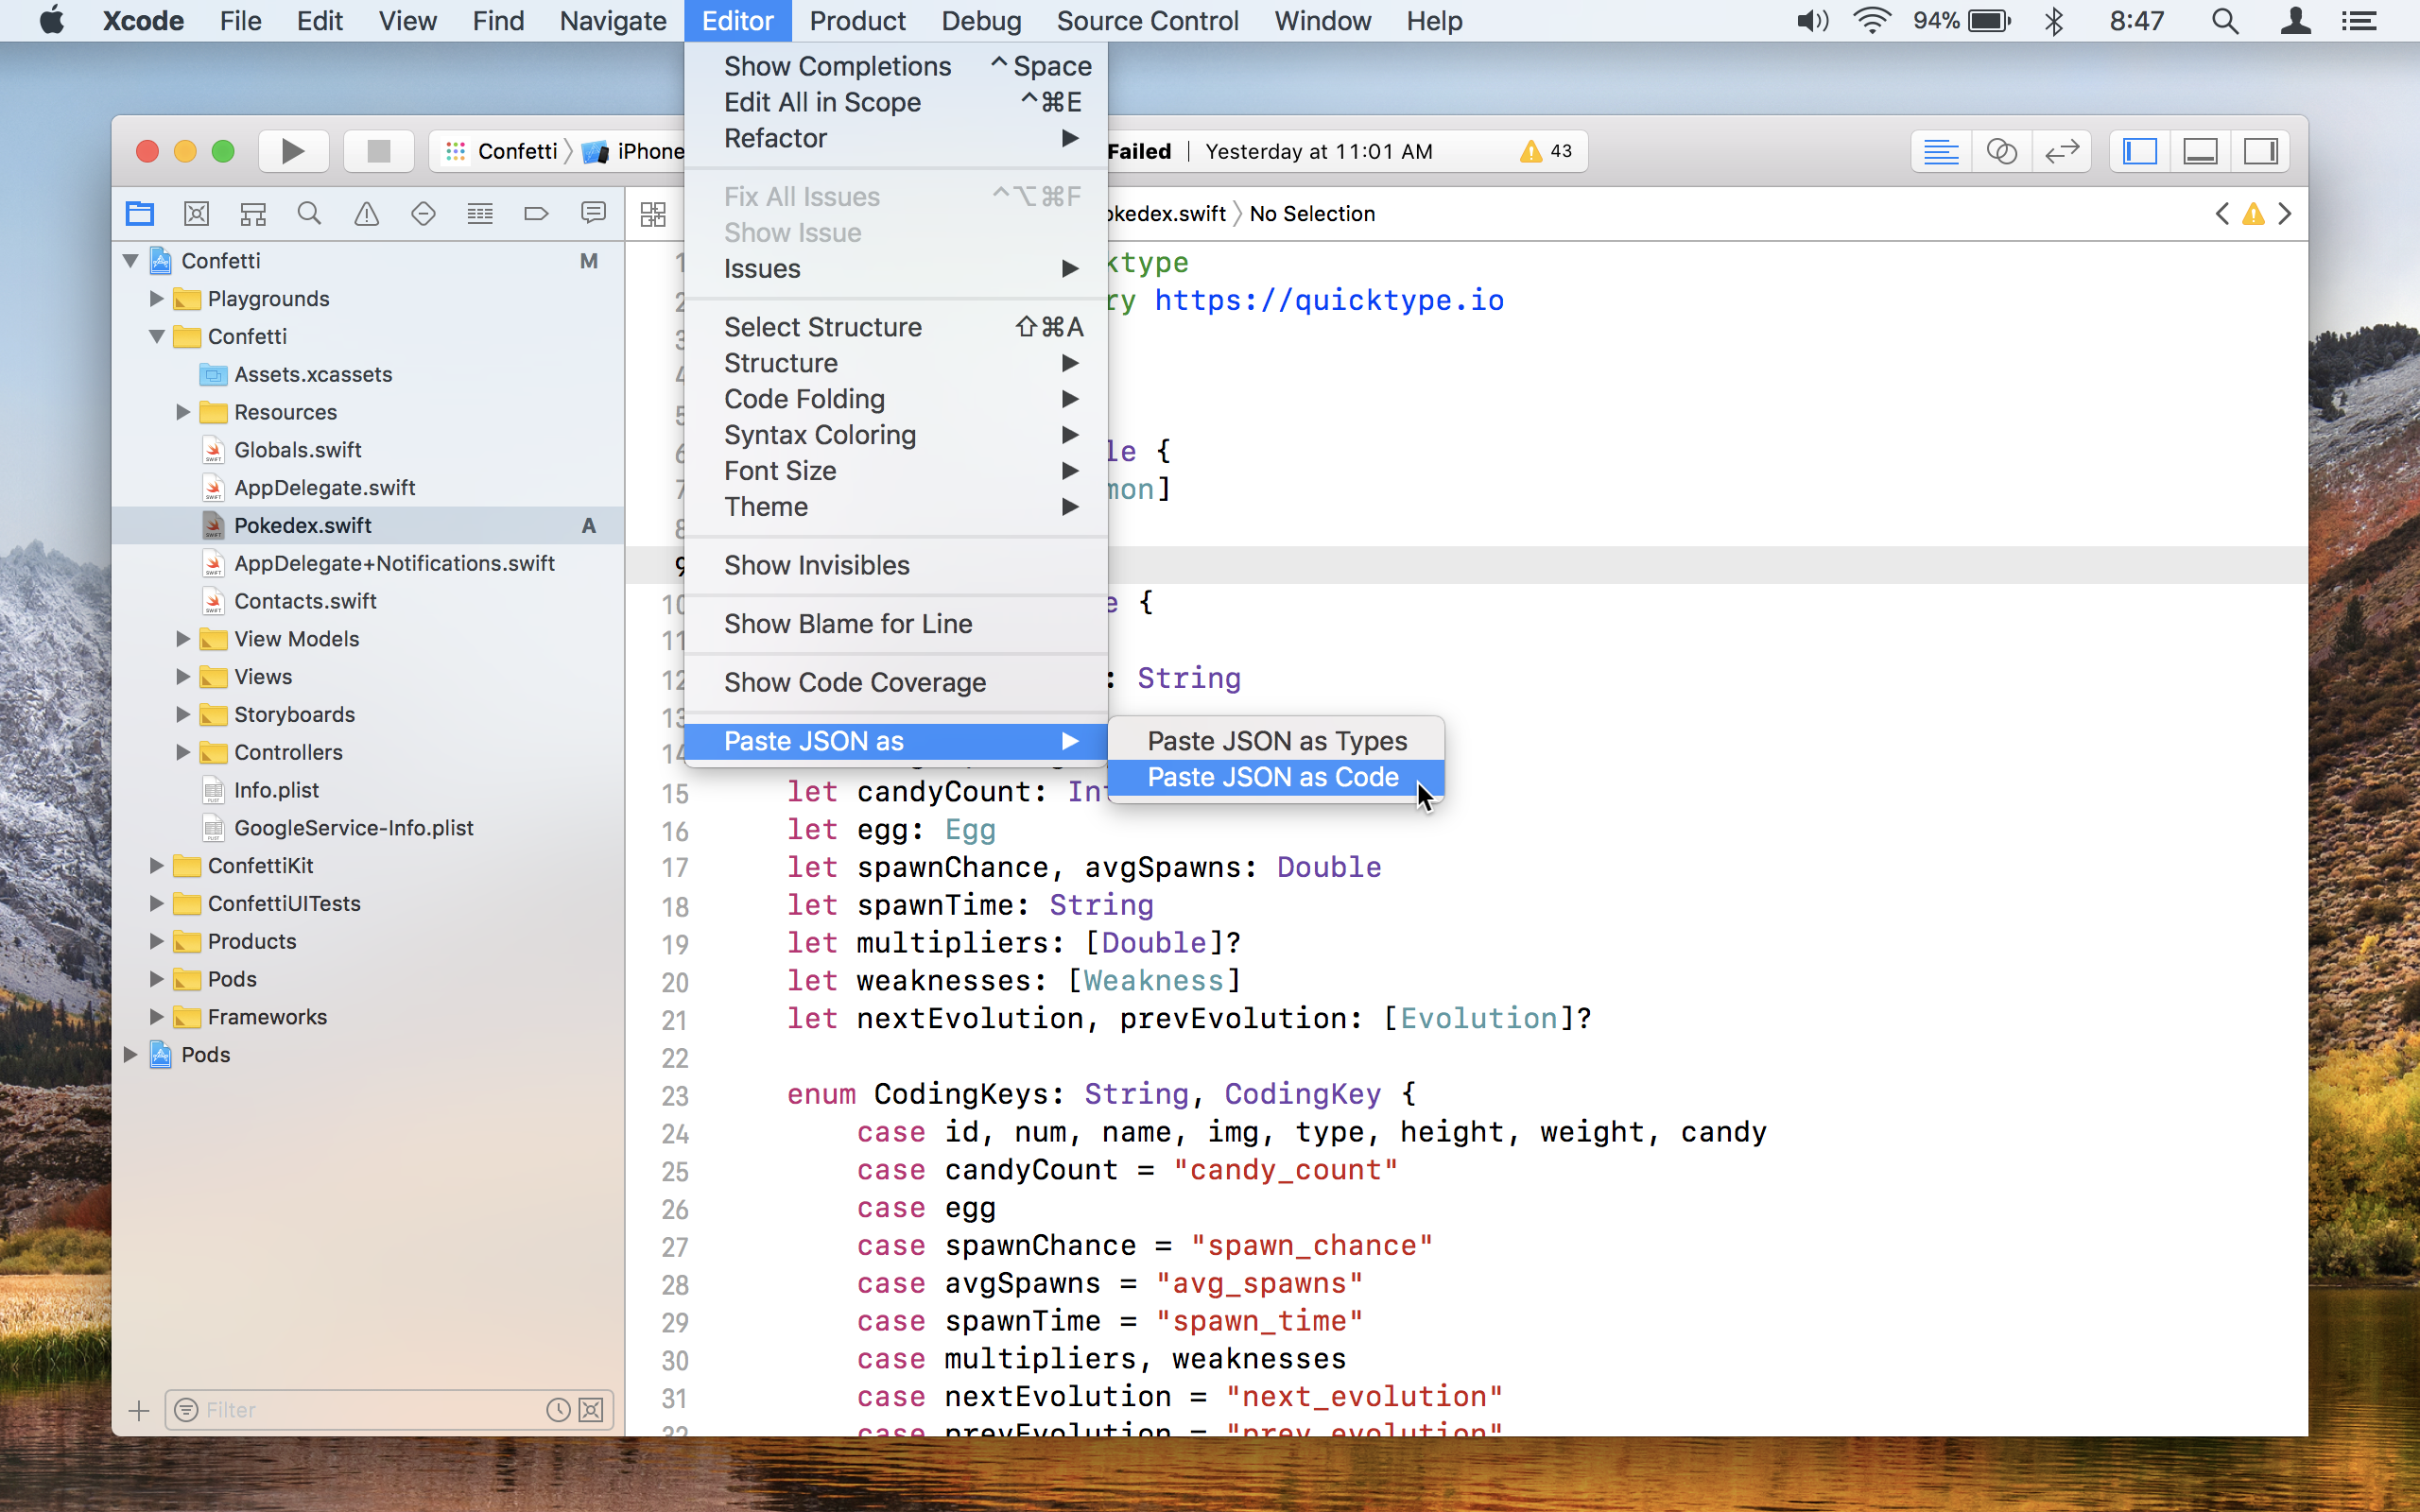 Paste JSON as code in Xcode and Visual Studio